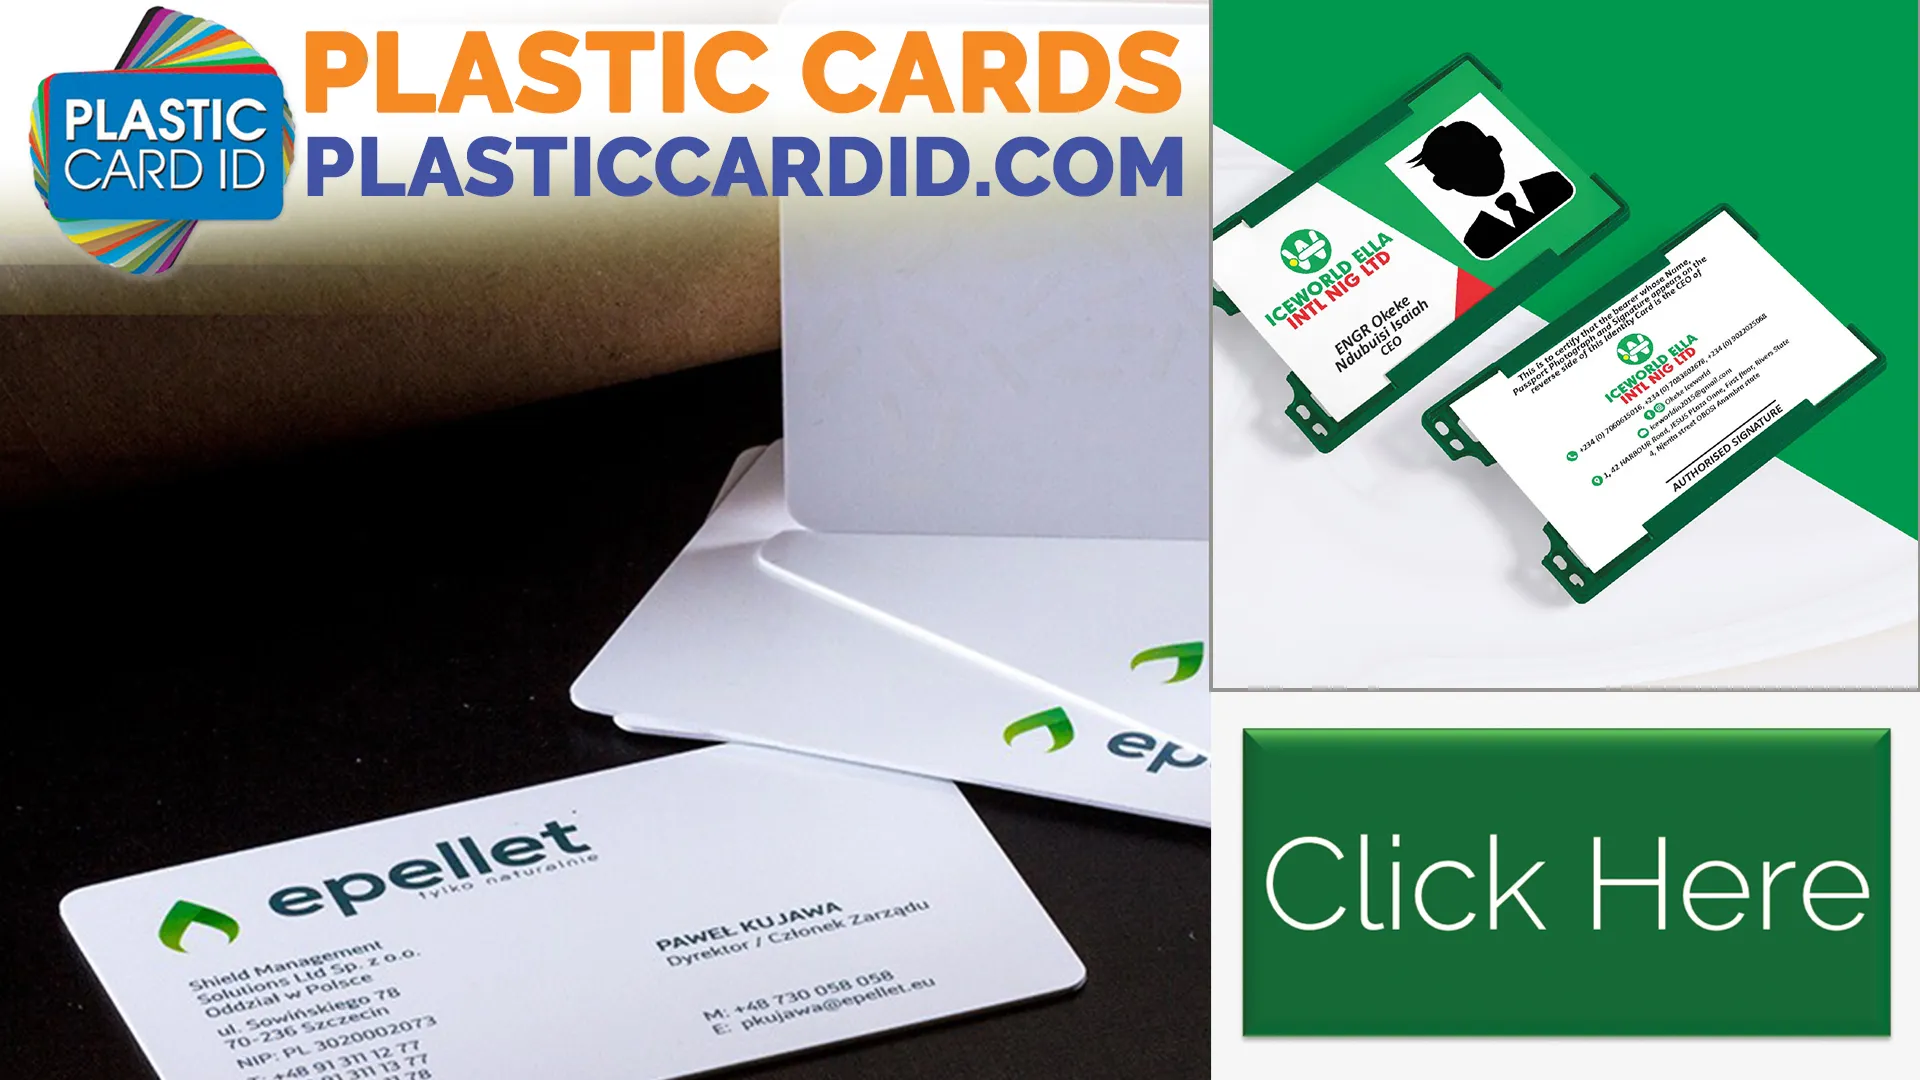 State-of-the-Art Card Printers and Refill Supplies